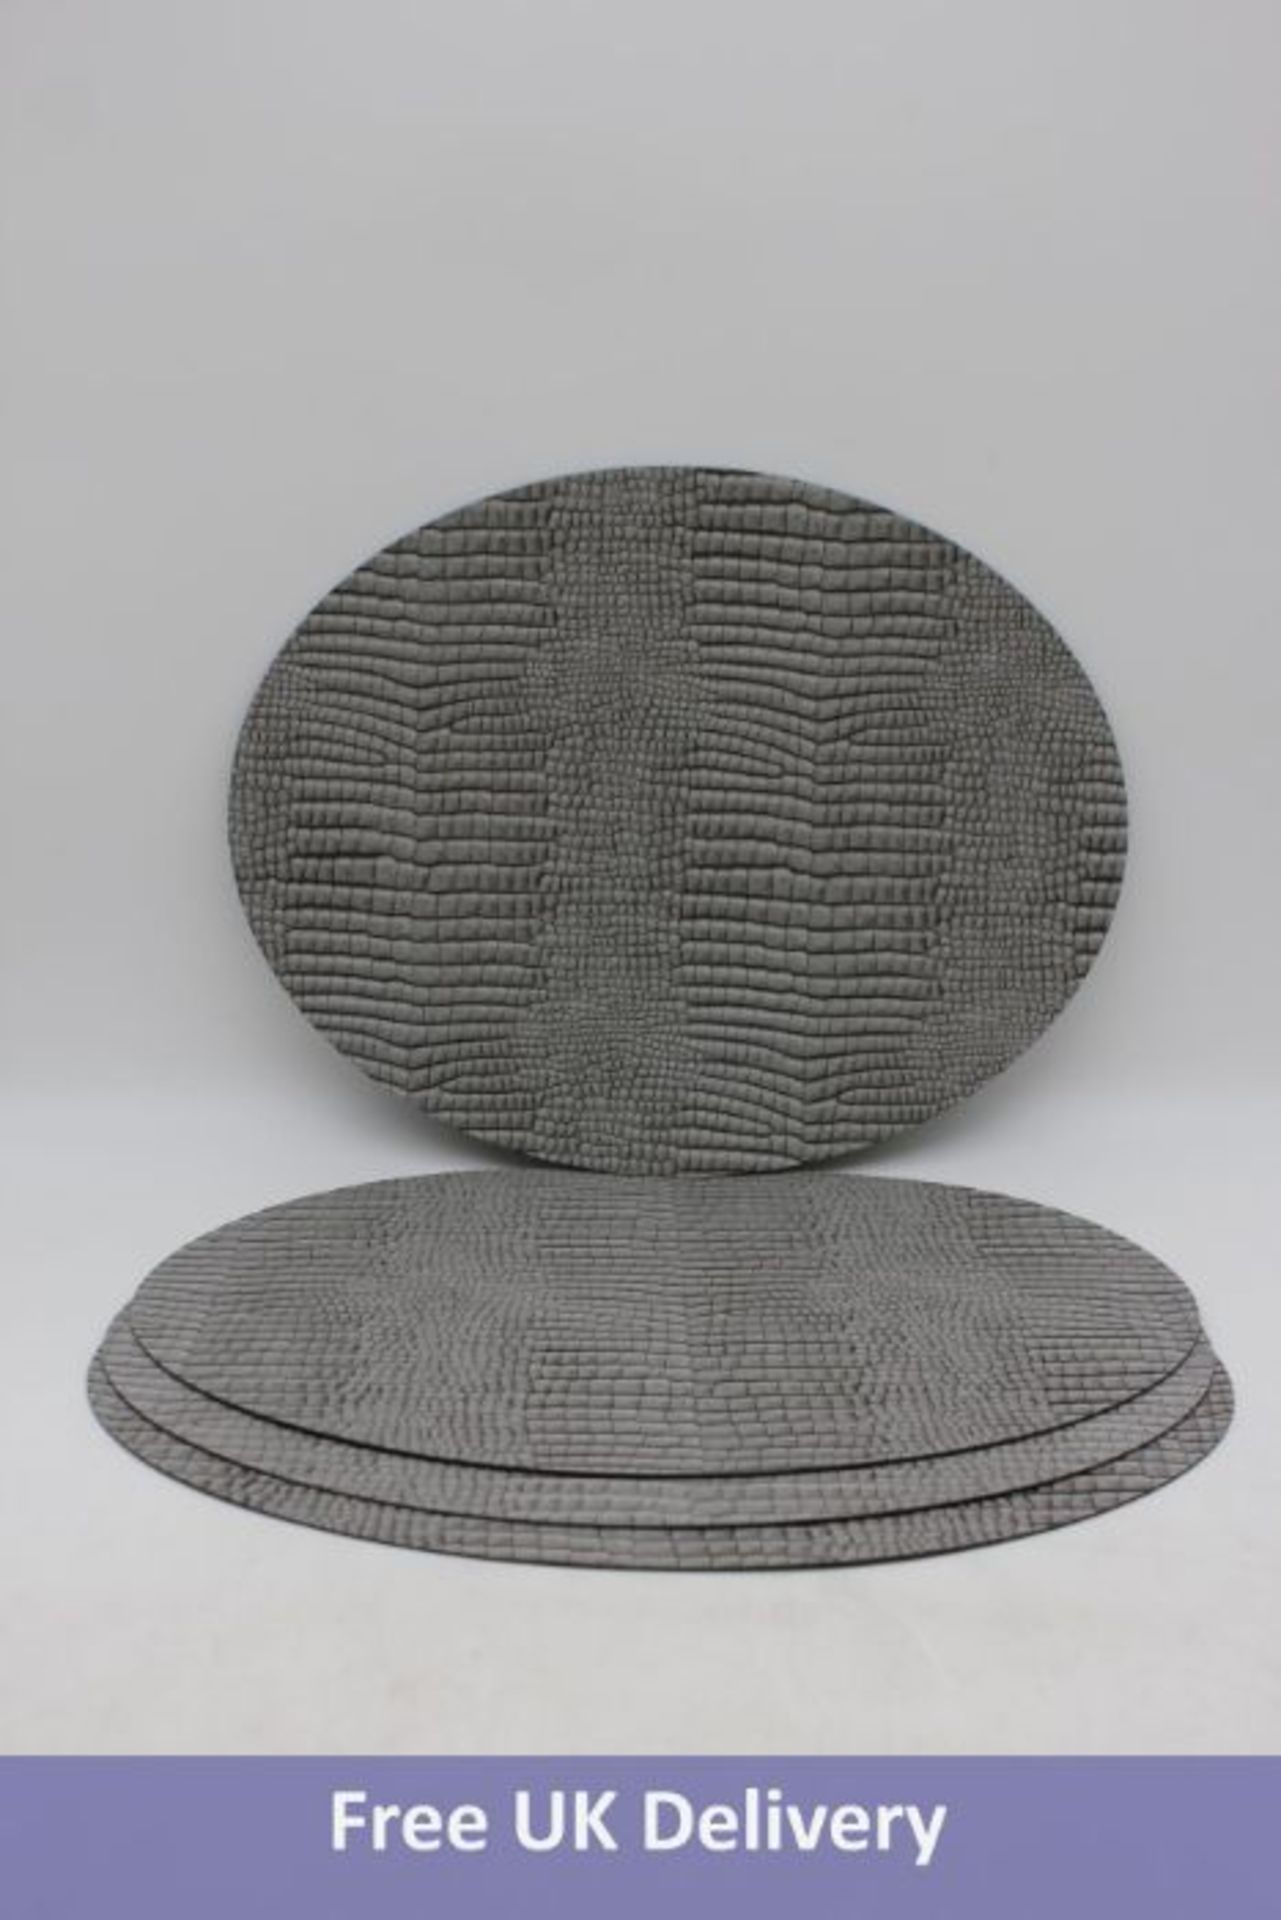 Twenty Lind DNA Oval Table Mats, CROCO Silver-Black Leather, 35 x 46 cm - Image 3 of 5